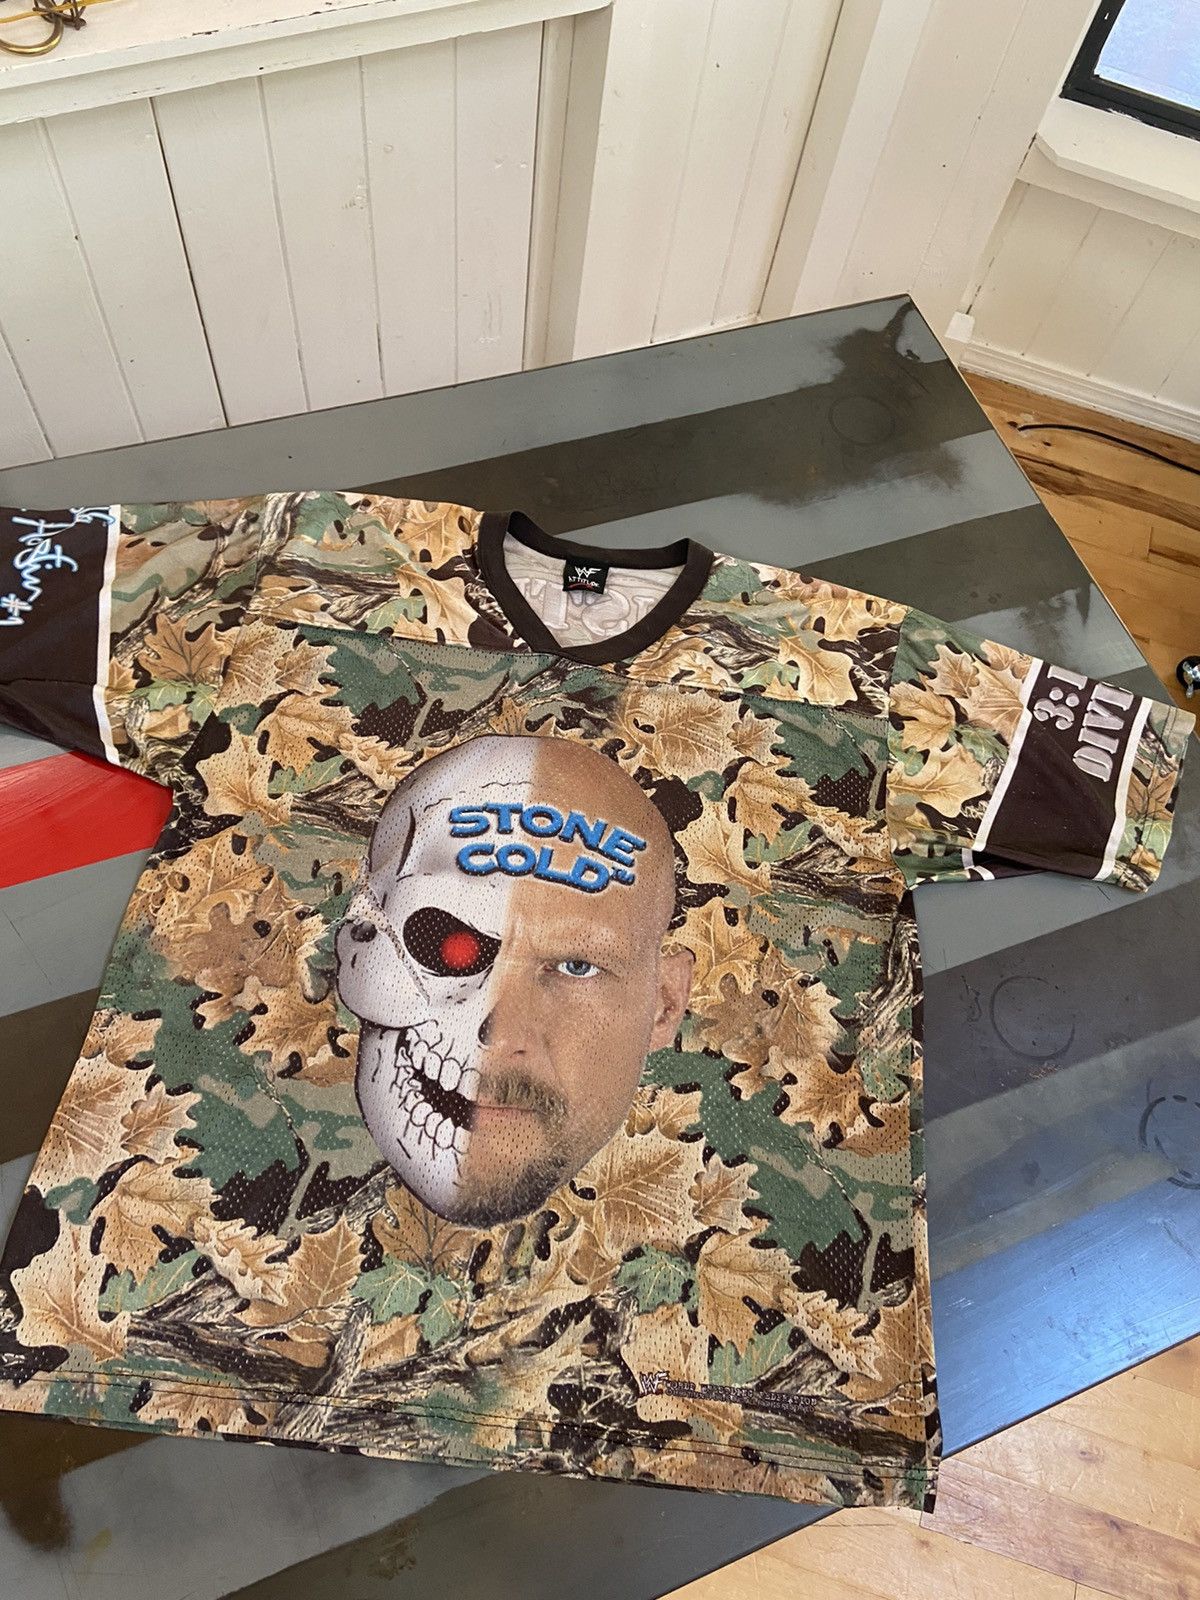 VINTAGE WWF STEVE STONE COLD AUSTIN FOOTBALL CAMO MESH JERSEY IN SIZE XL